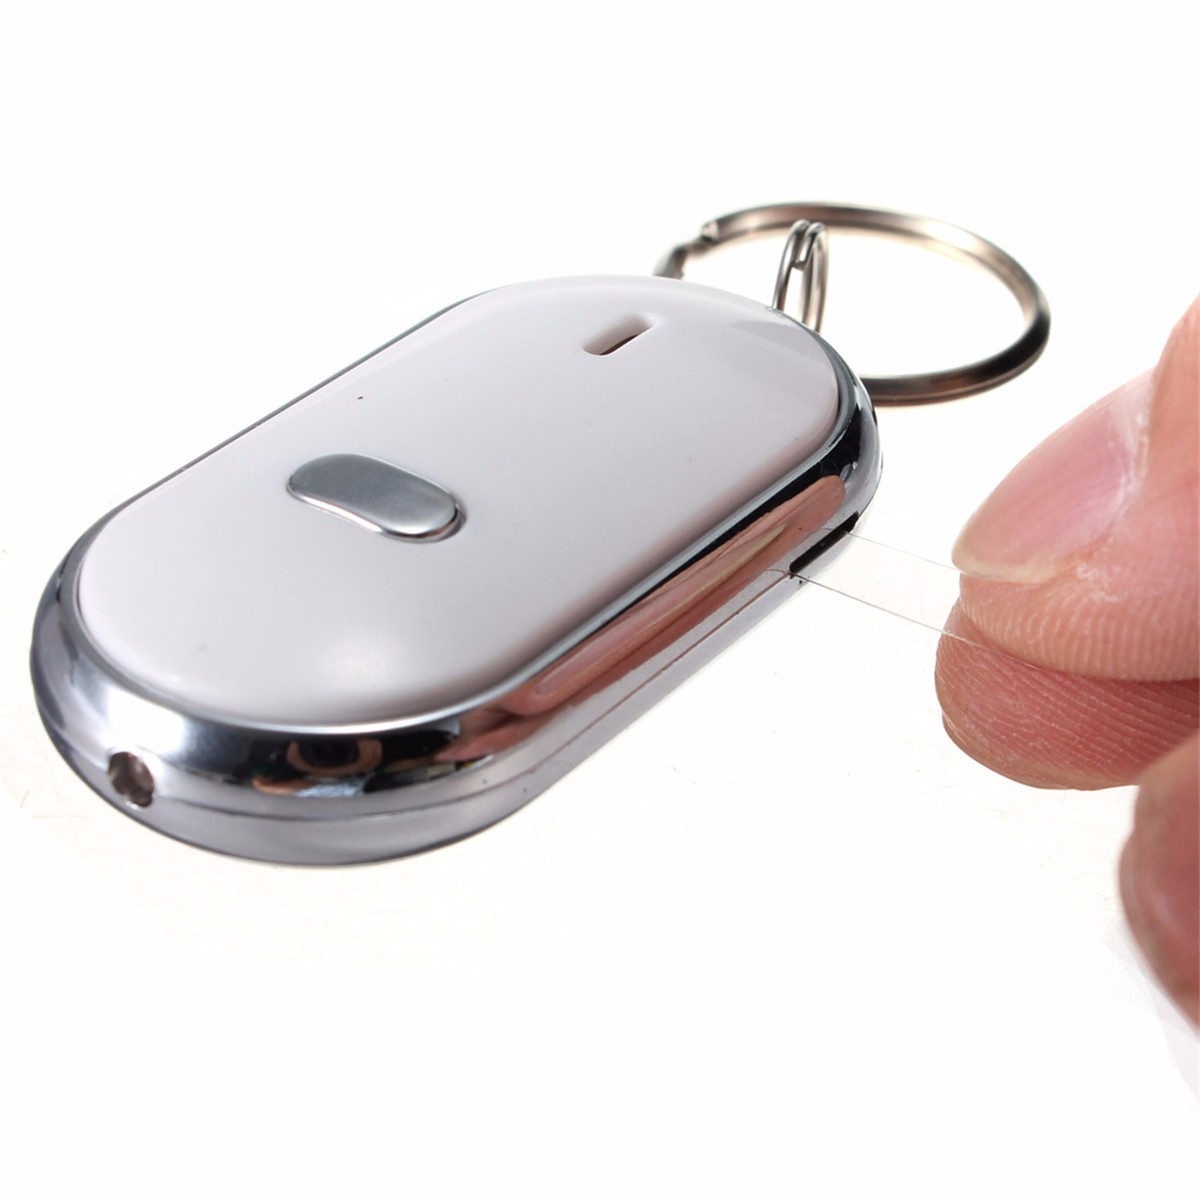 3pcs-Whistle-Key-Finder-Keychain-Sound-LED-With-Whistle-Claps-1319318